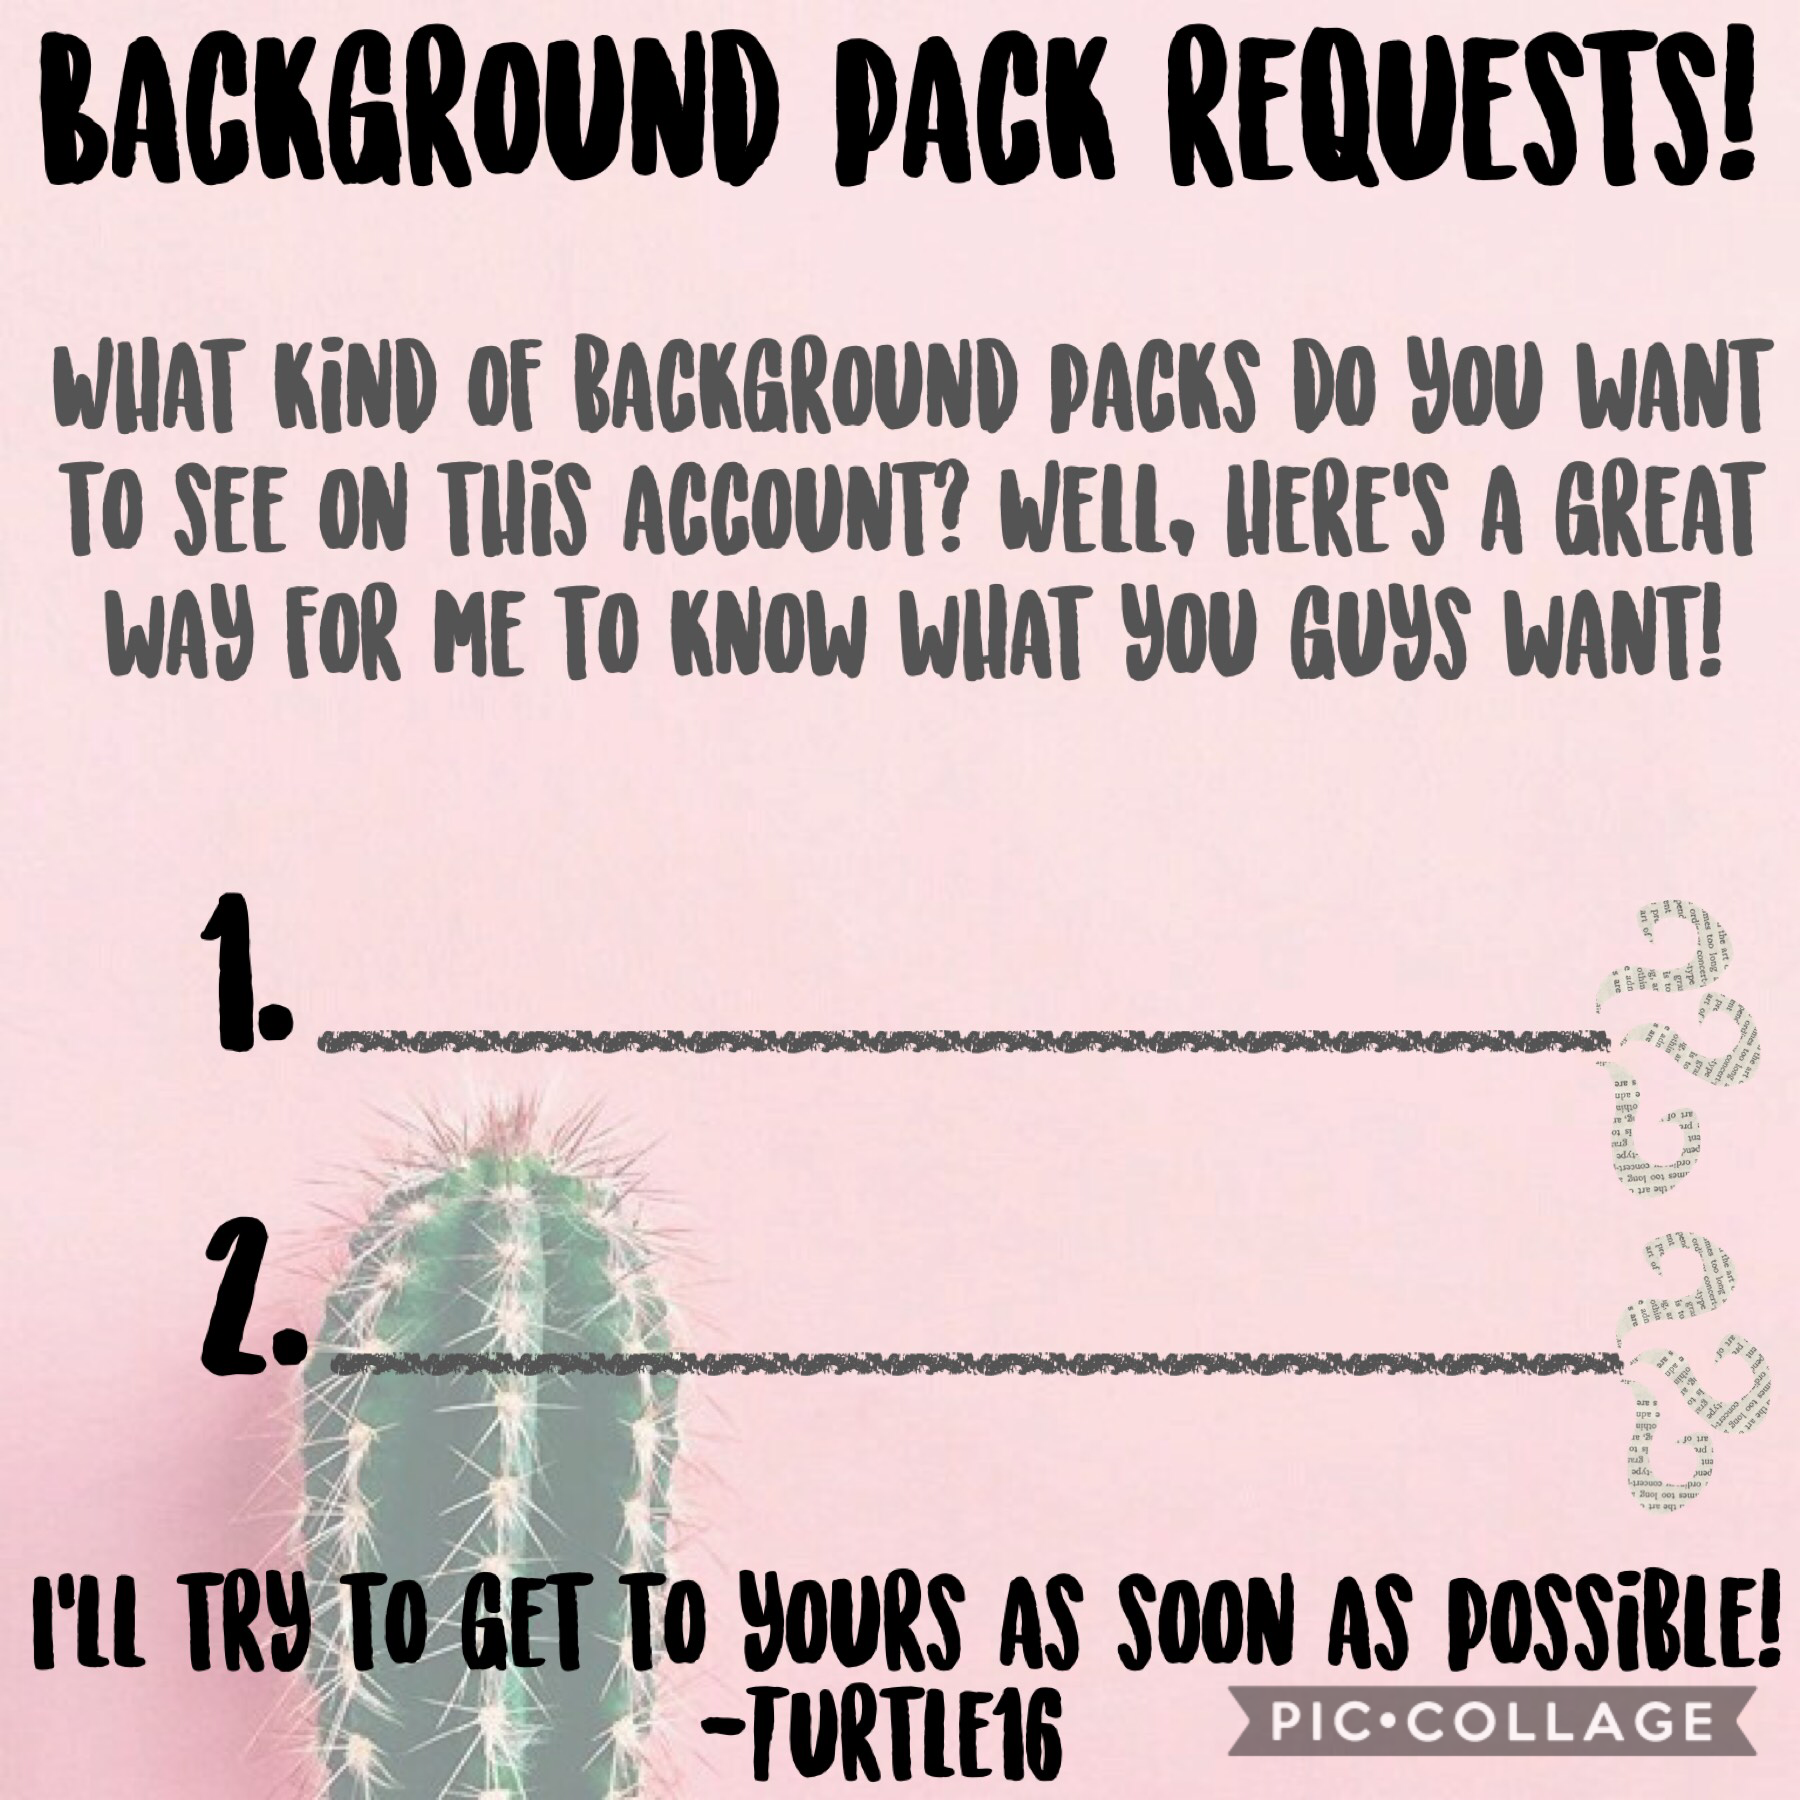 I will be posting at least 2 more of my choice just because I have all the backgrounds for it😂 I hope this is helpful!